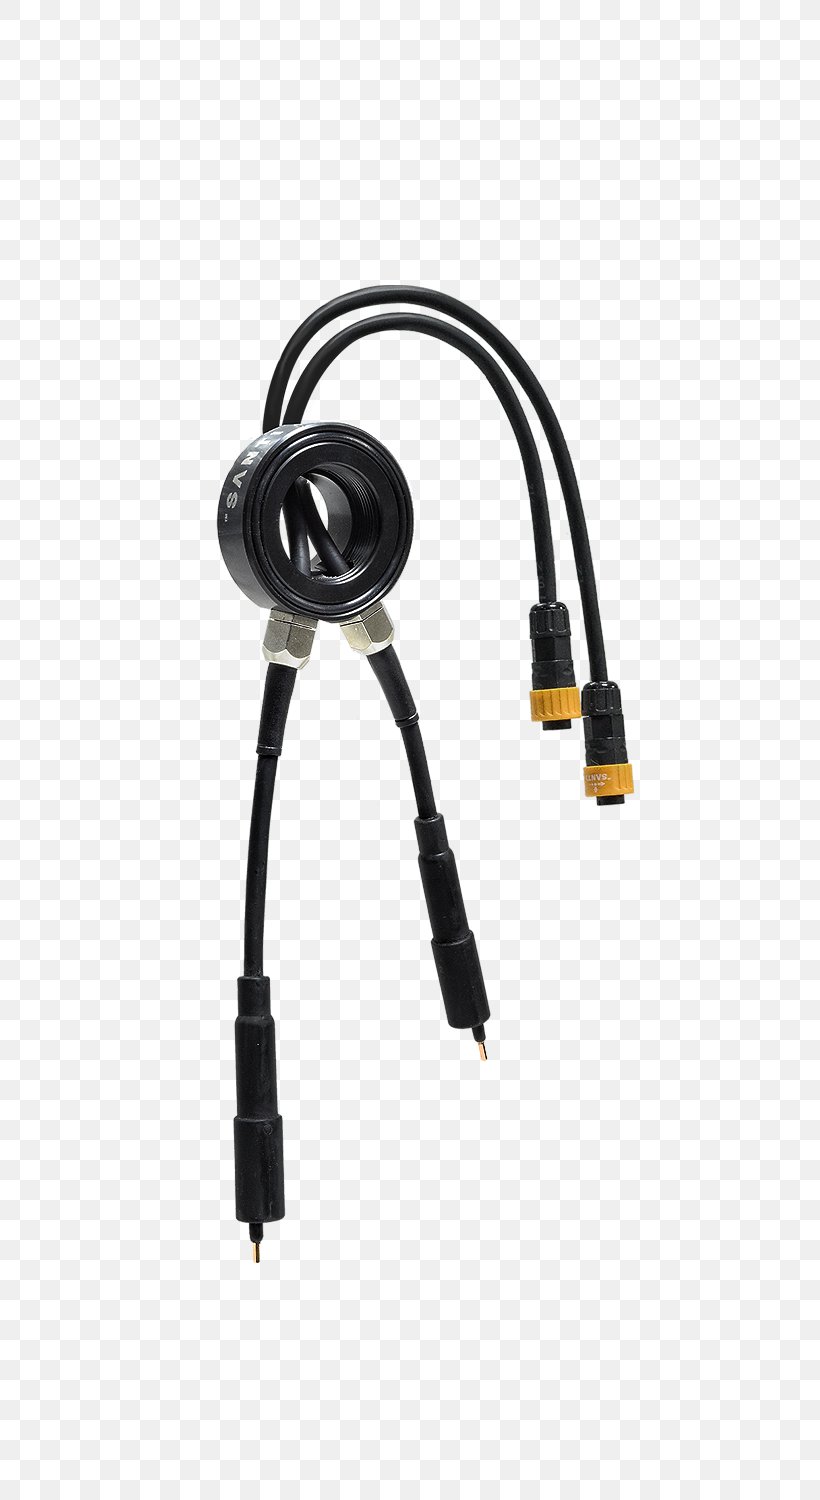 Dry Suit Electrical Connector Scuba Diving Underwater Diving Diving Equipment, PNG, 700x1500px, Dry Suit, Battery Pack, Berogailu, Cable, Coaxial Cable Download Free